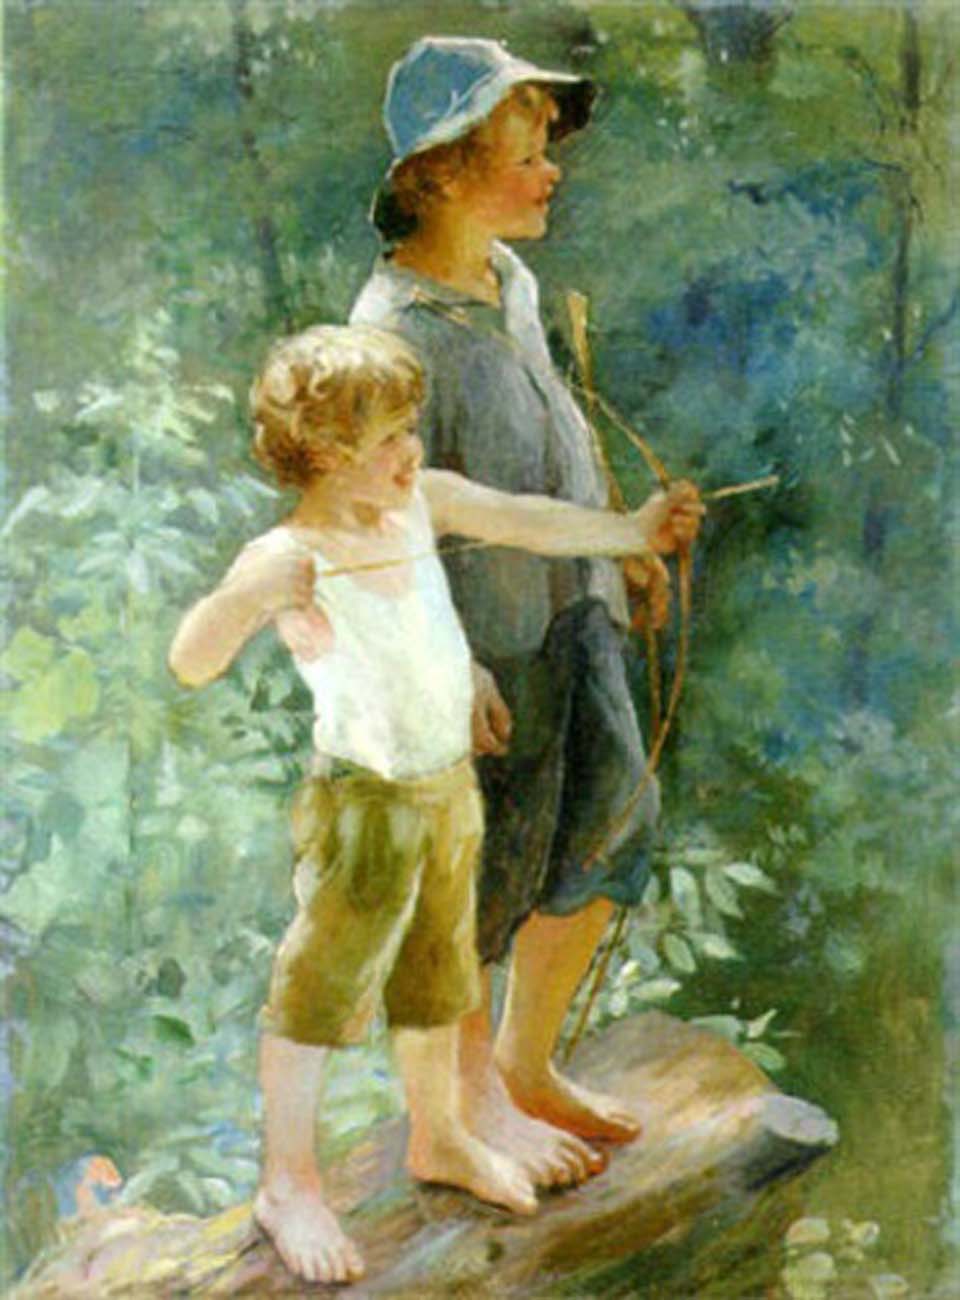 The young hunters